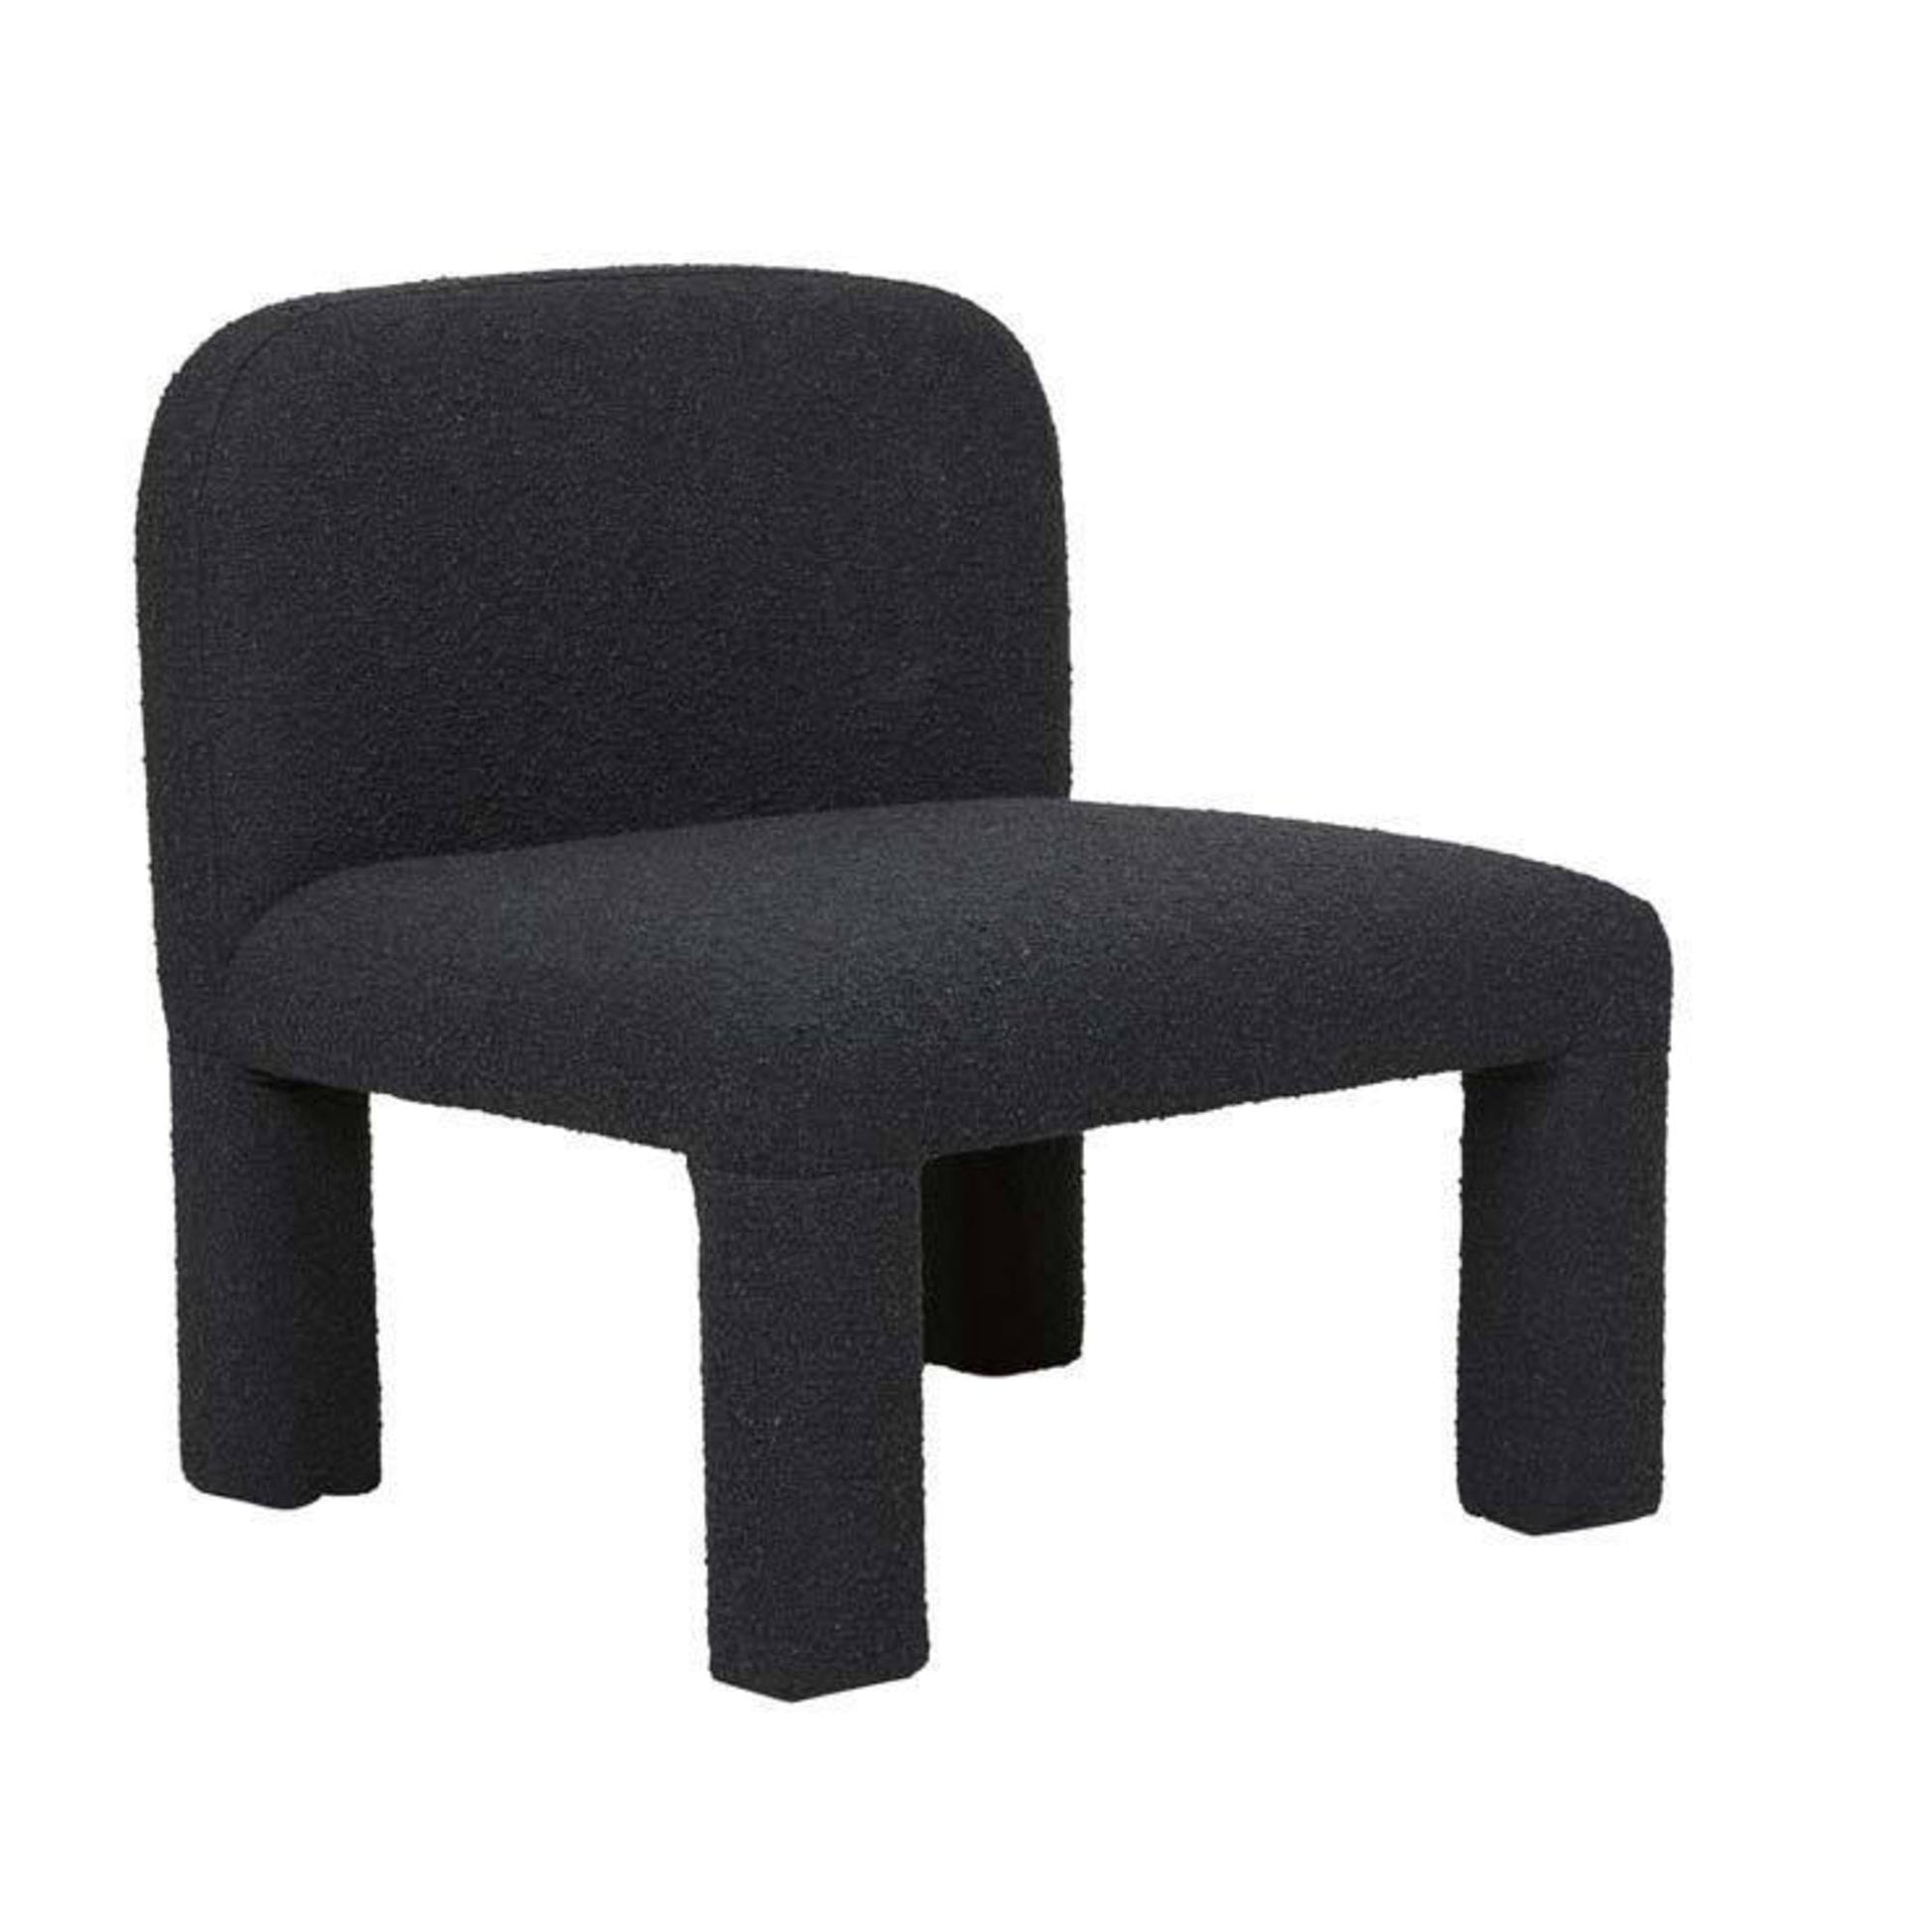 Hugo Arc occasional chair in charcoal